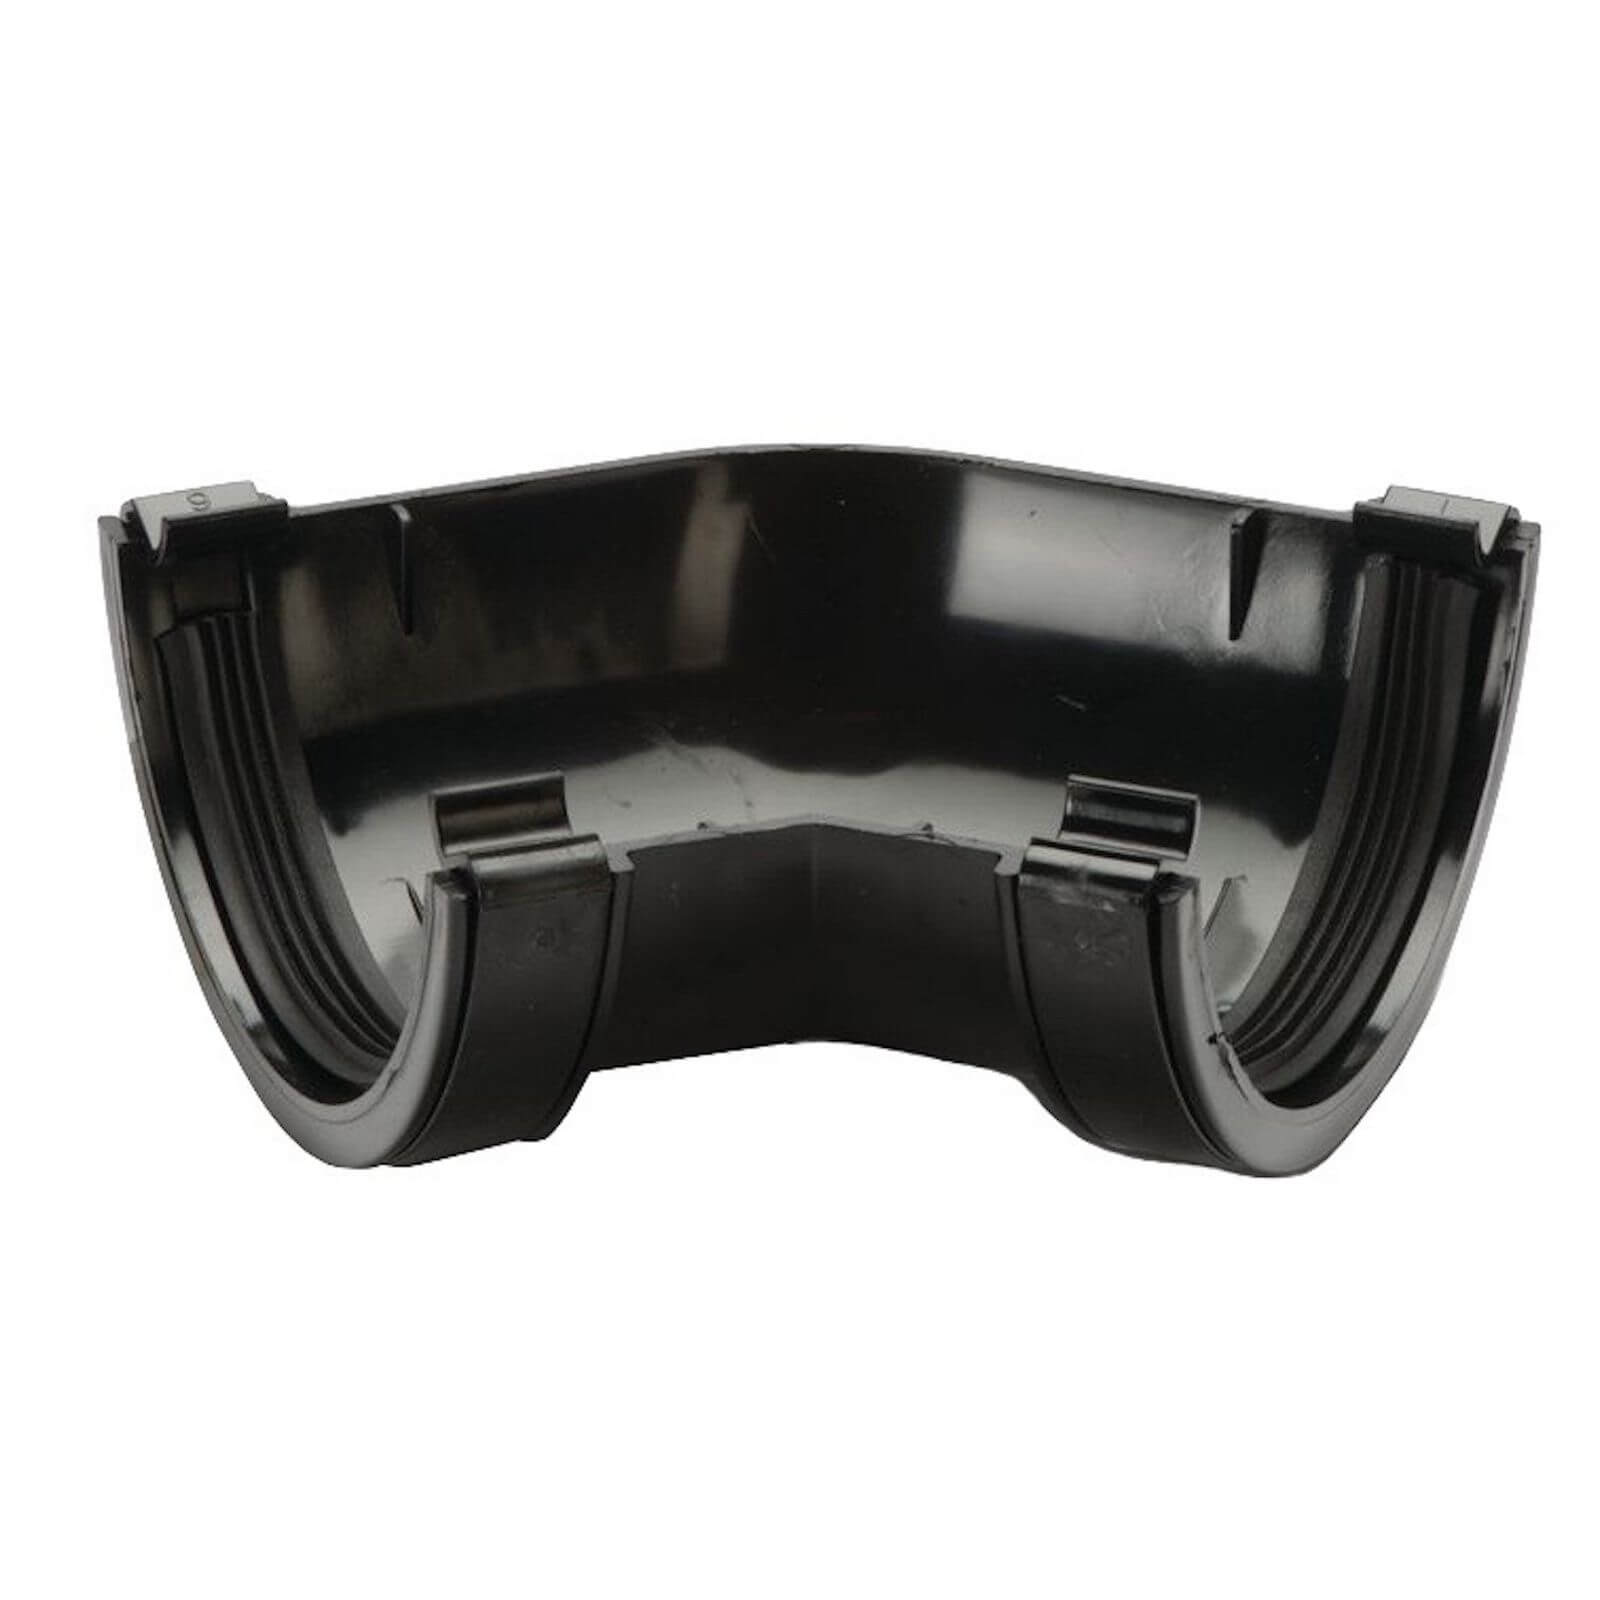 Photo of Polypipe Half Round Gutter Angle - 112mm X 135 Degree - Black